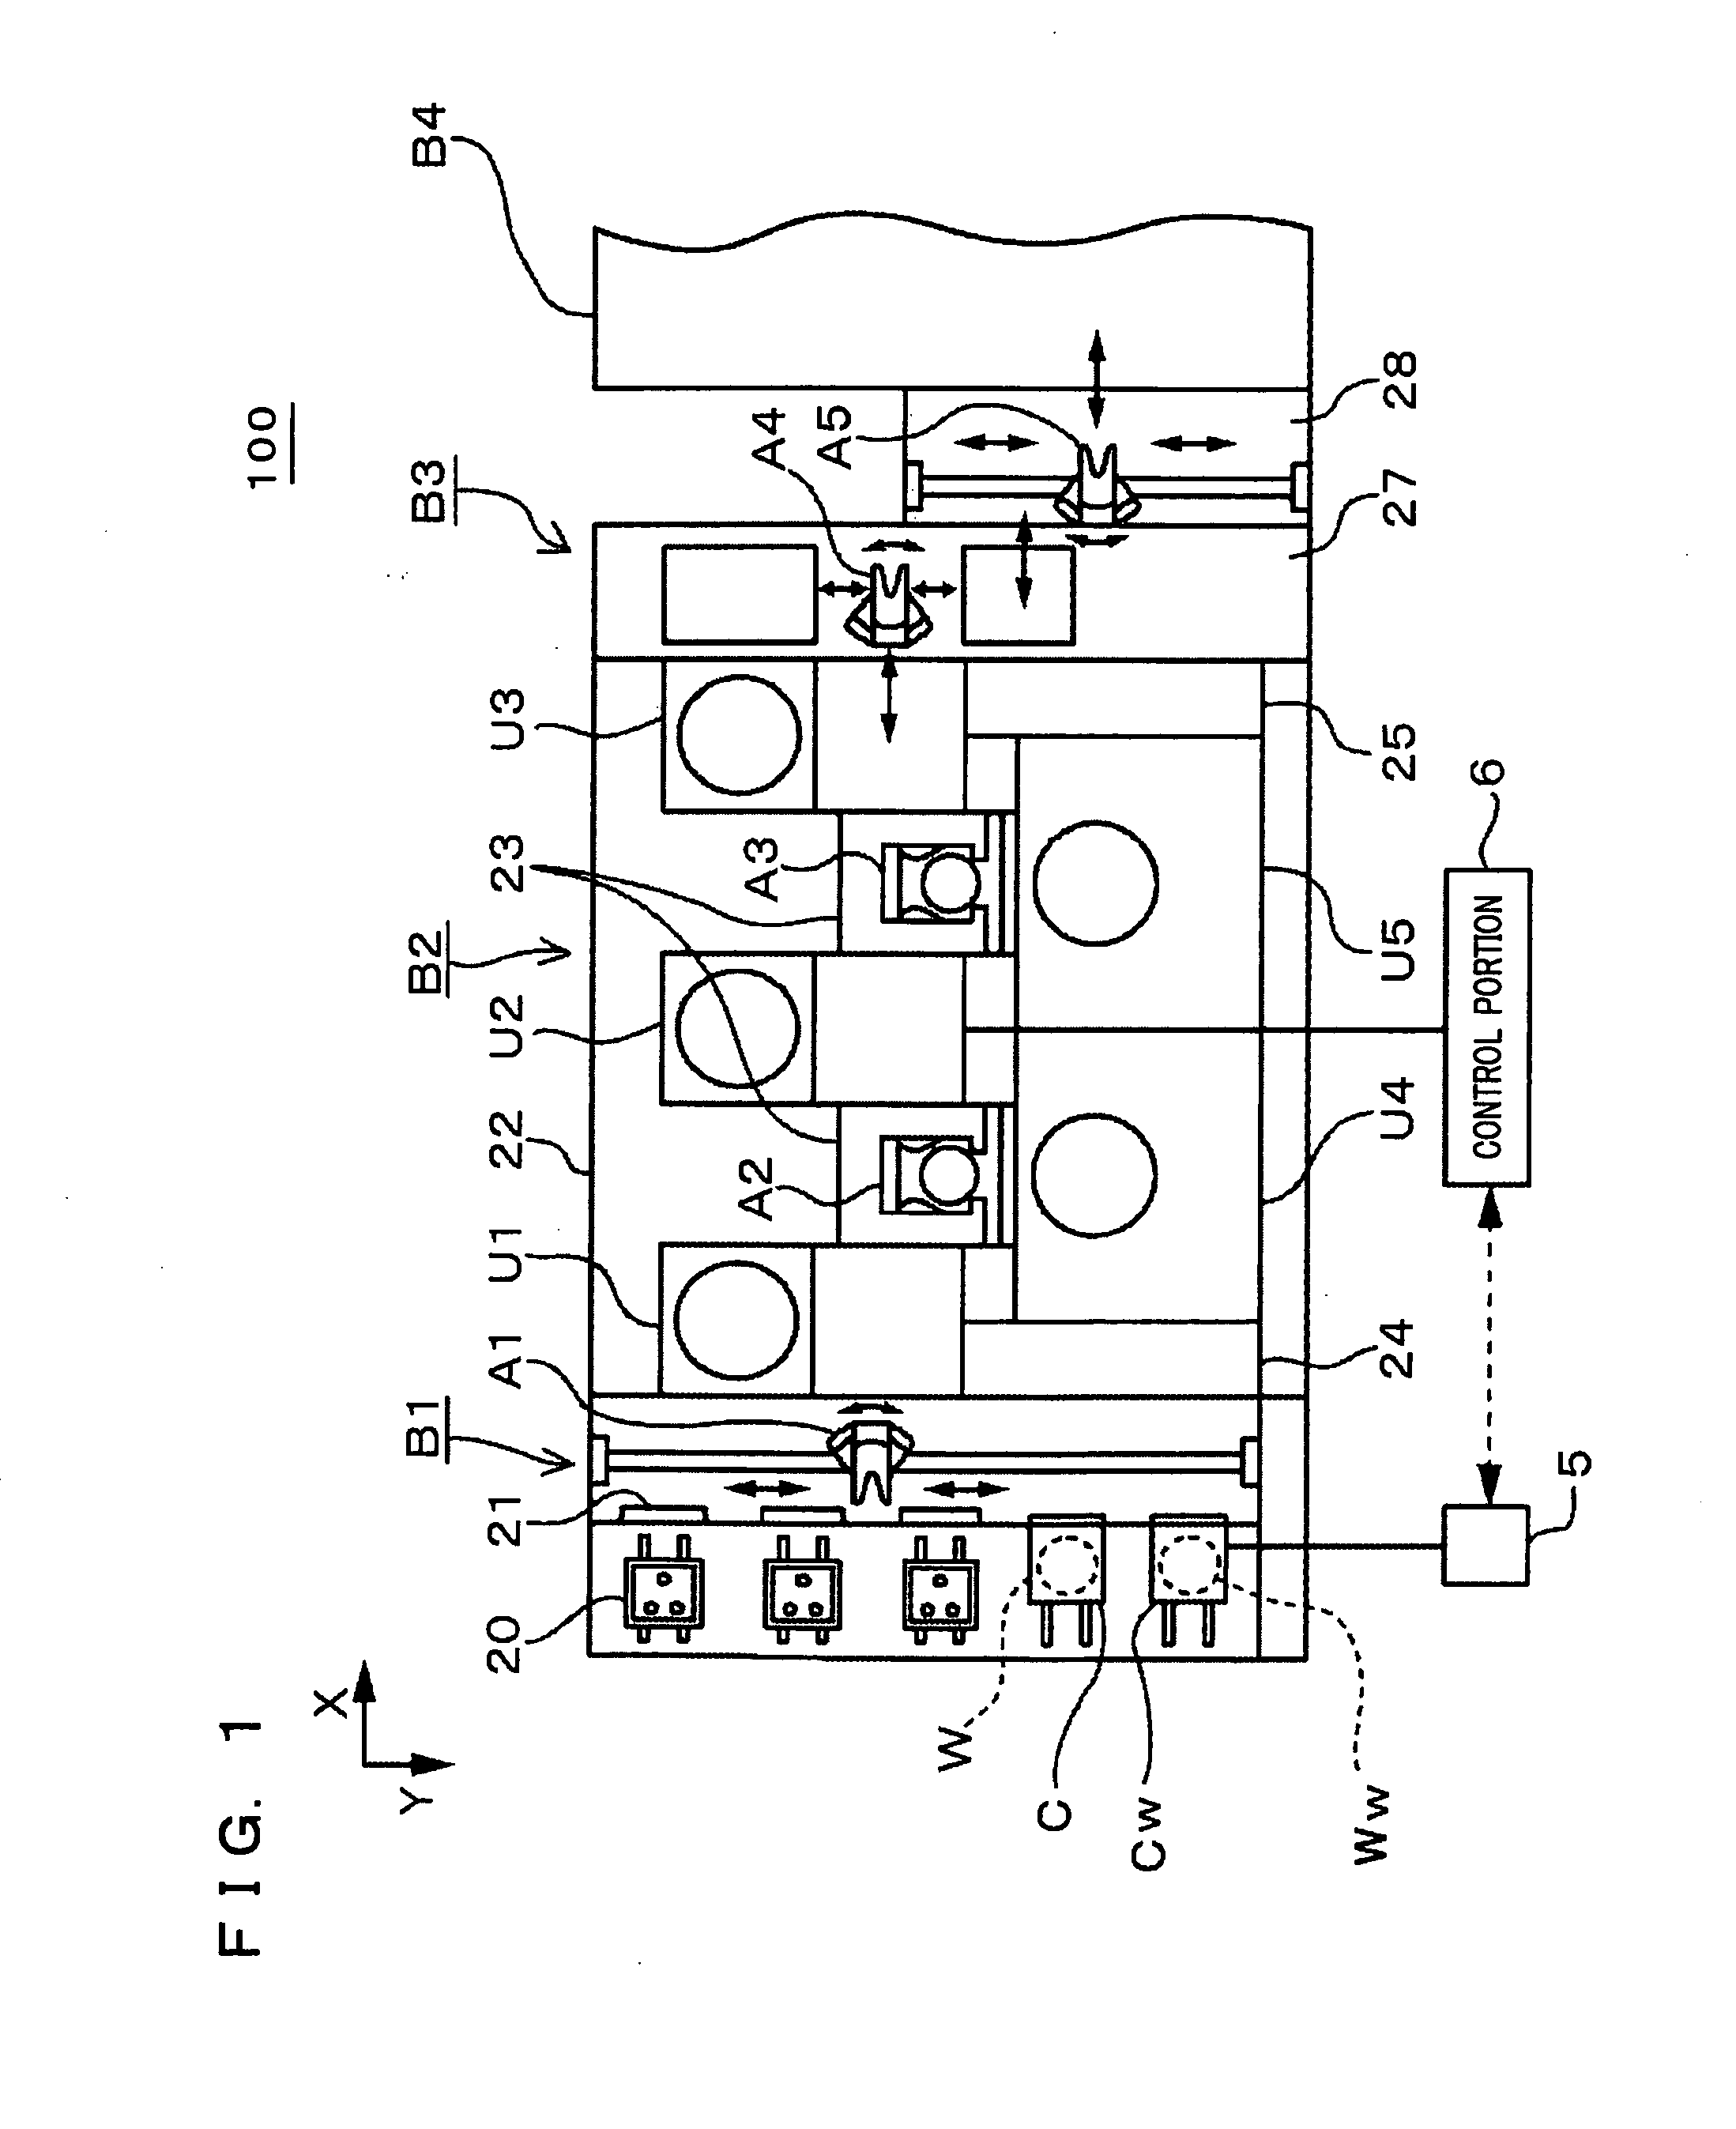 Method of Measuring a Heating Plate Temperature, Substrate Processing Device and Computer-Readable Recording Medium With Computer Program Recorded Thereon For Measuring the Heating Plate Temperature